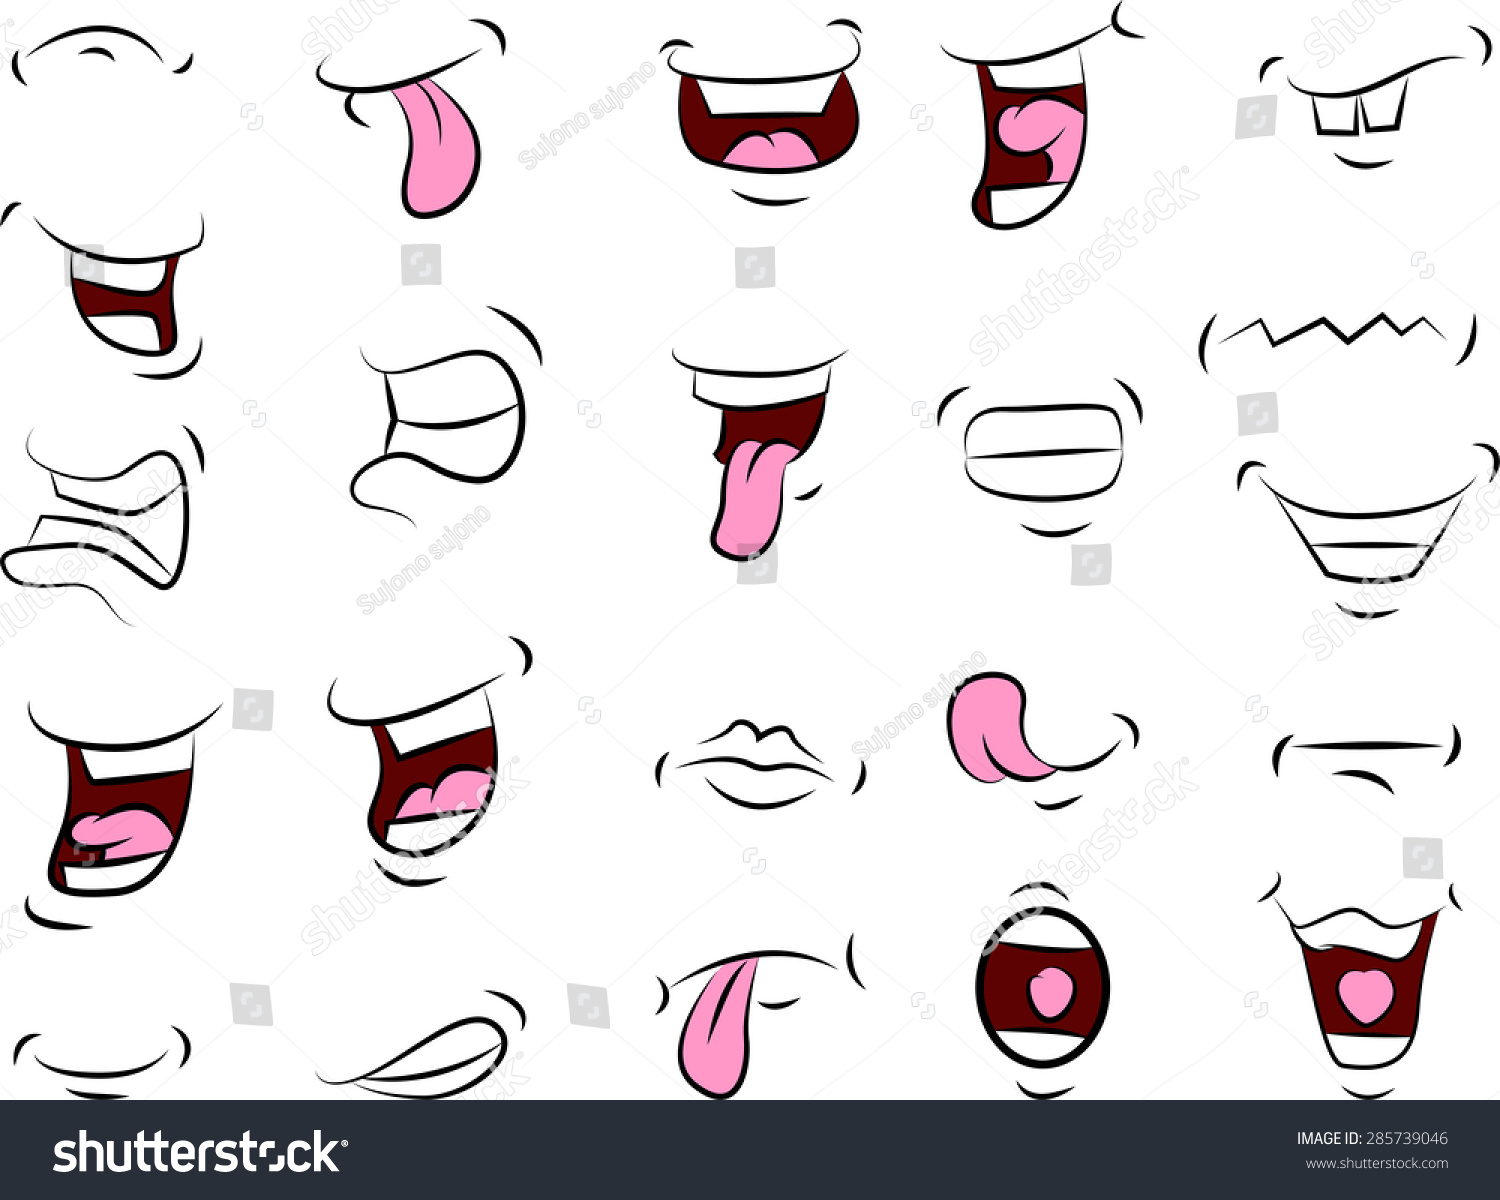 Set Of Mouths Cartoon For Your Design Stock Vector Illustration